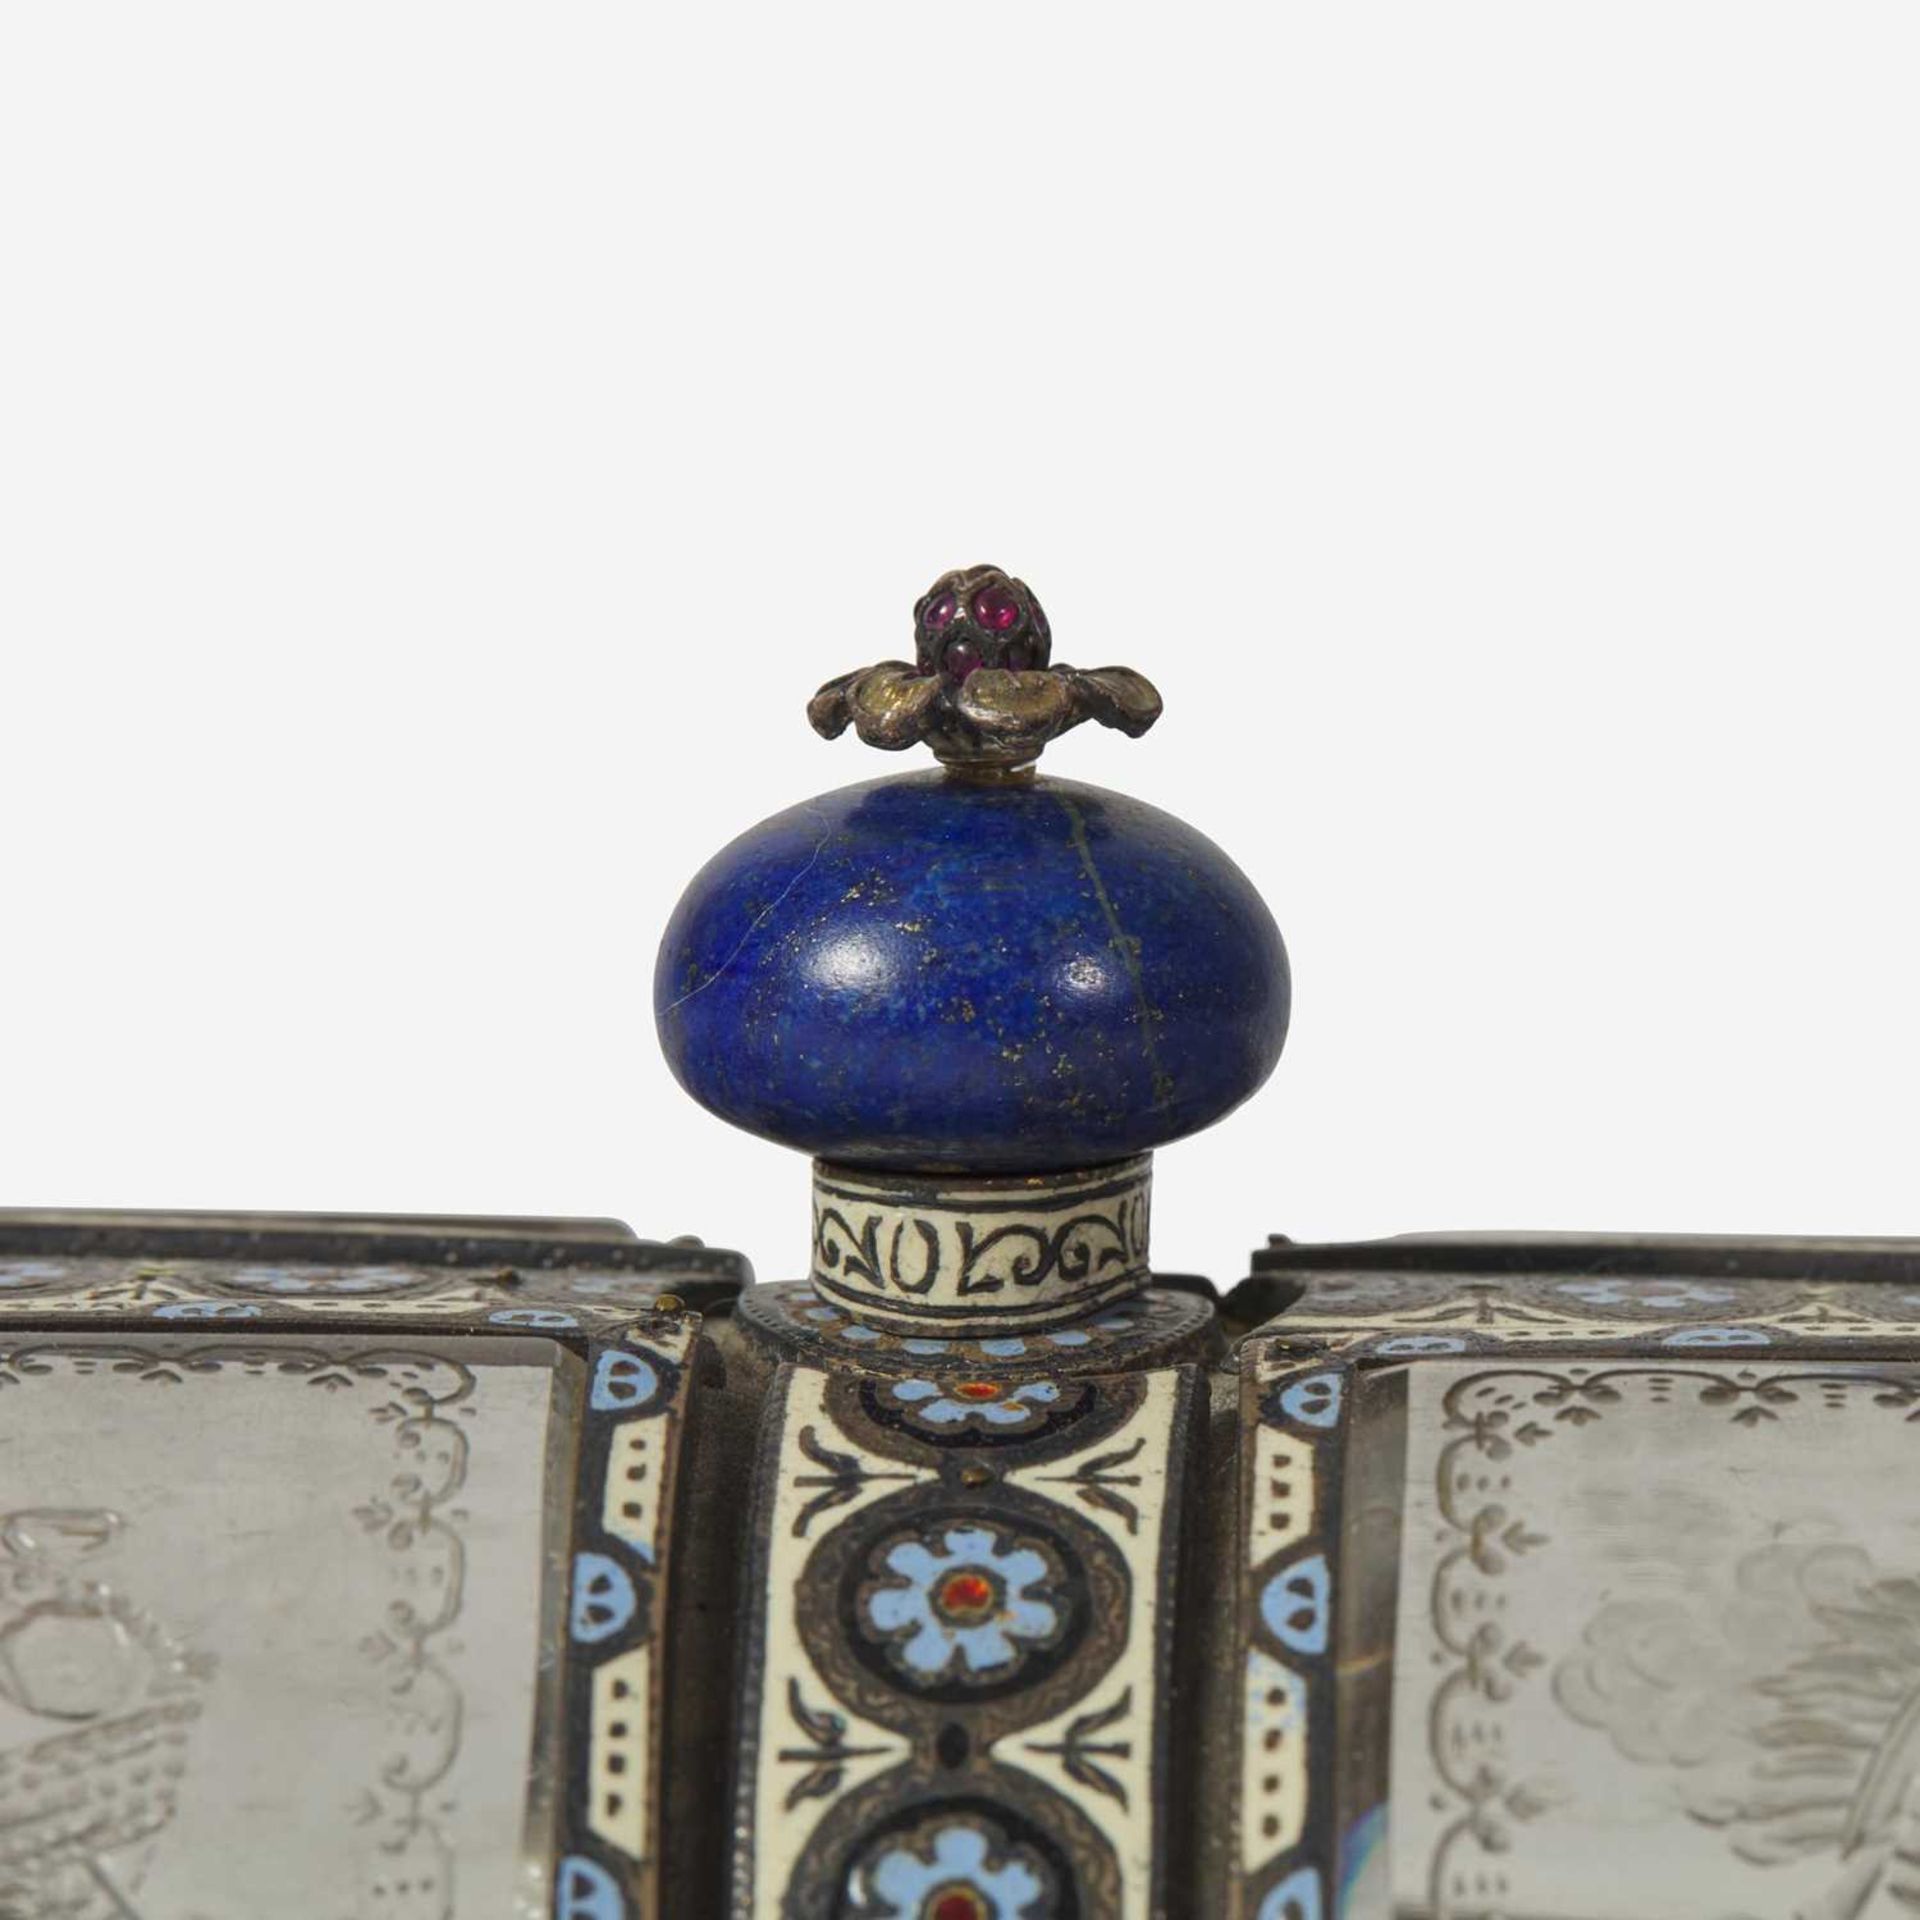 A Viennese cut-glass, silver, and cloisonné enamel coffer late 19th / early 20th century - Image 3 of 3